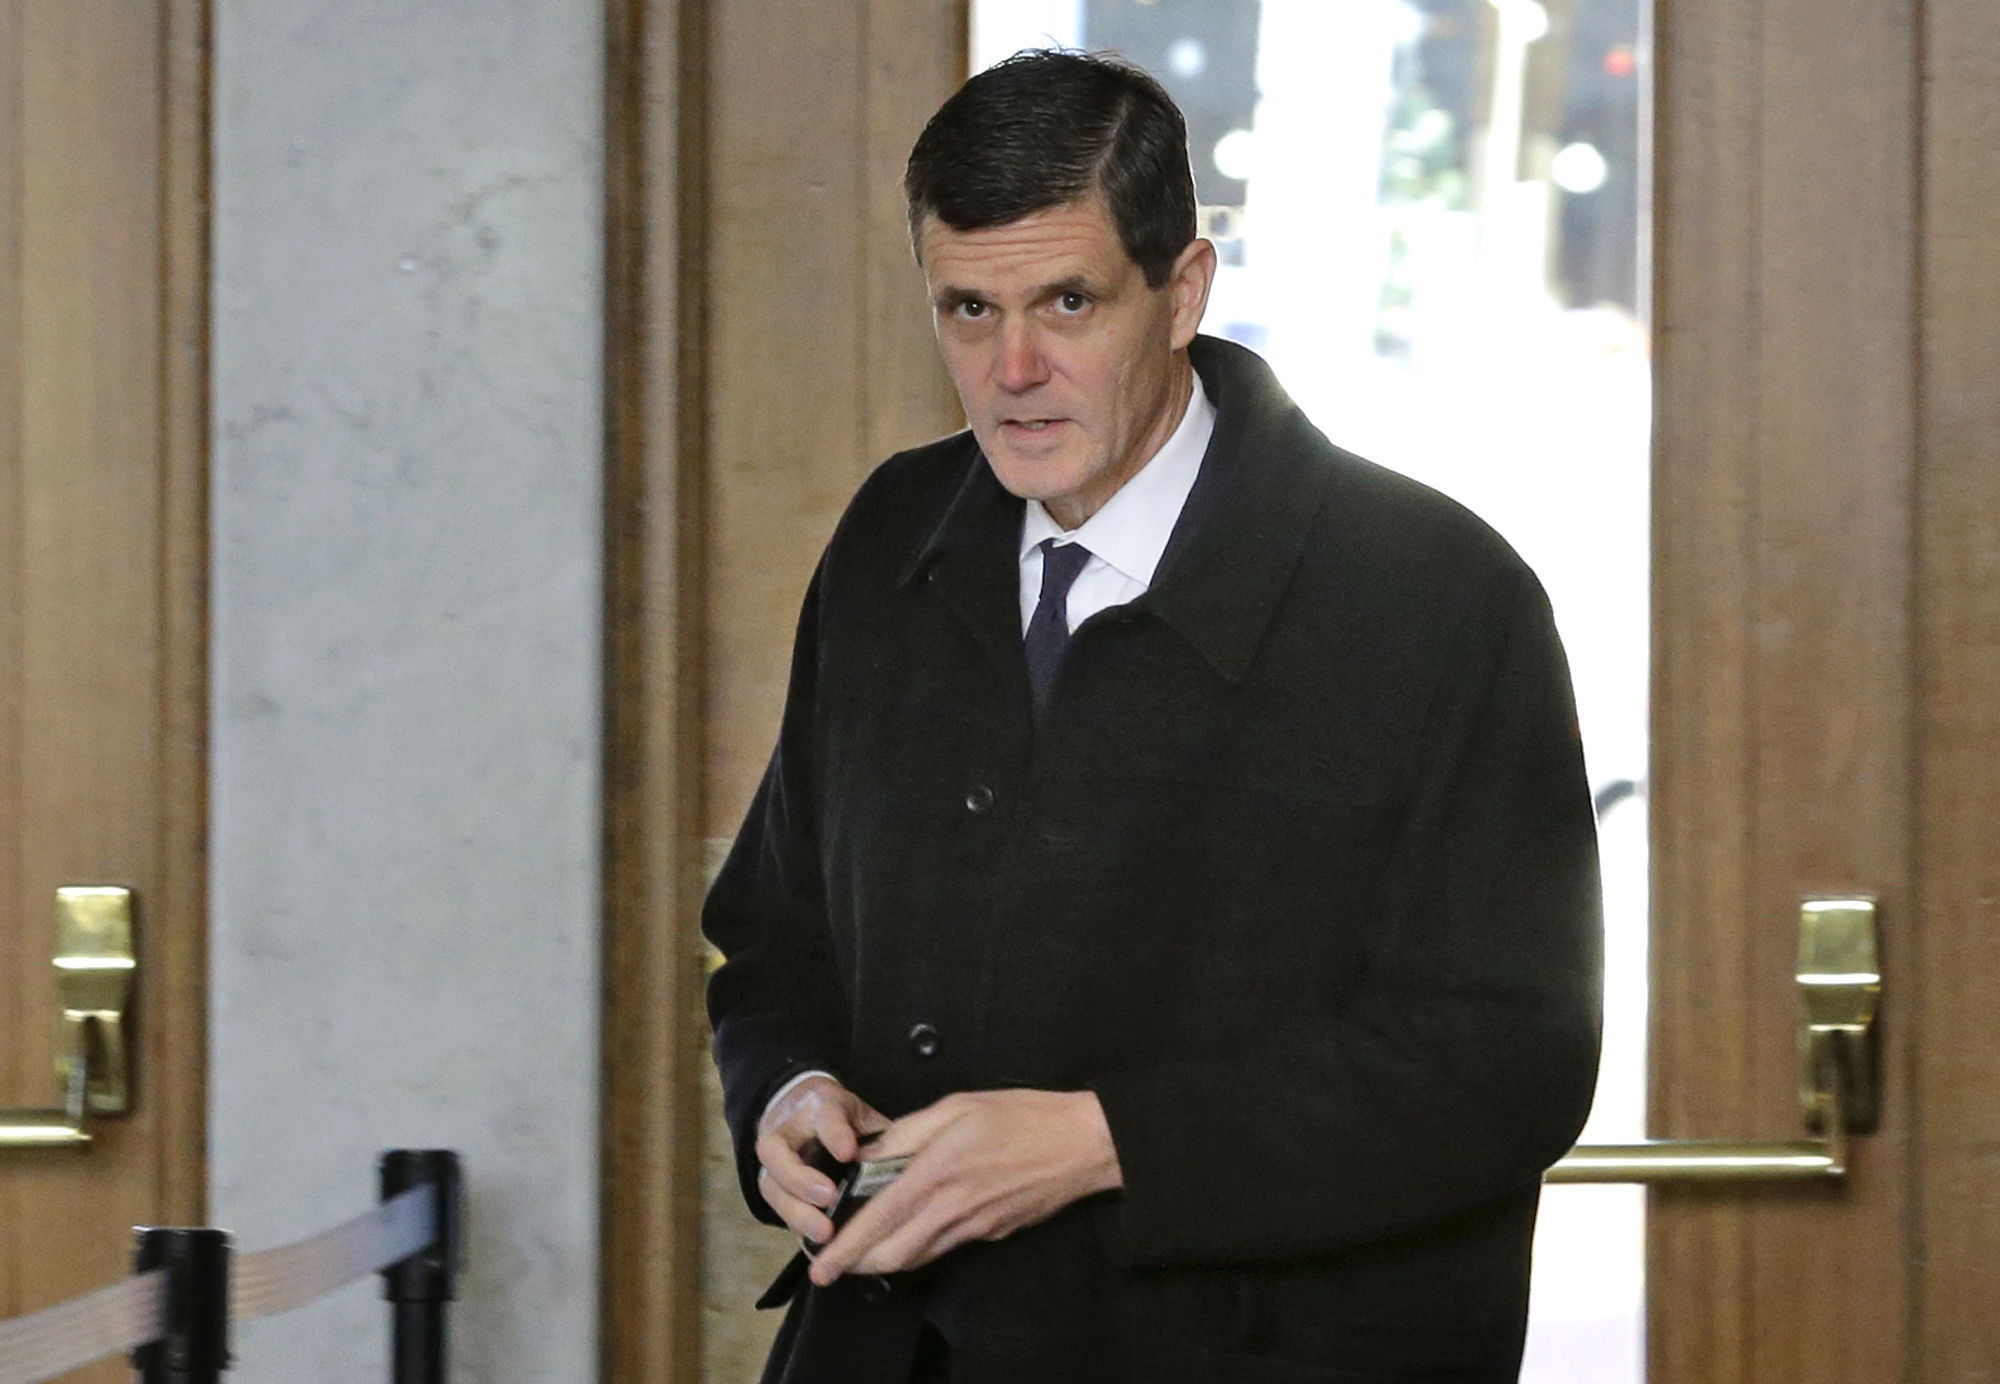 Washington state auditor Troy Kelley holds his wallet after showing his identification as he arrives for a federal court hearing, Tuesday, Dec.1, 2015, in Tacoma. Kelley was asking a judge to force the Justice Department to return $908,000 that was seized from Kelley after he was charged criminally with possession of more than $1 million in stolen money as well as money laundering.